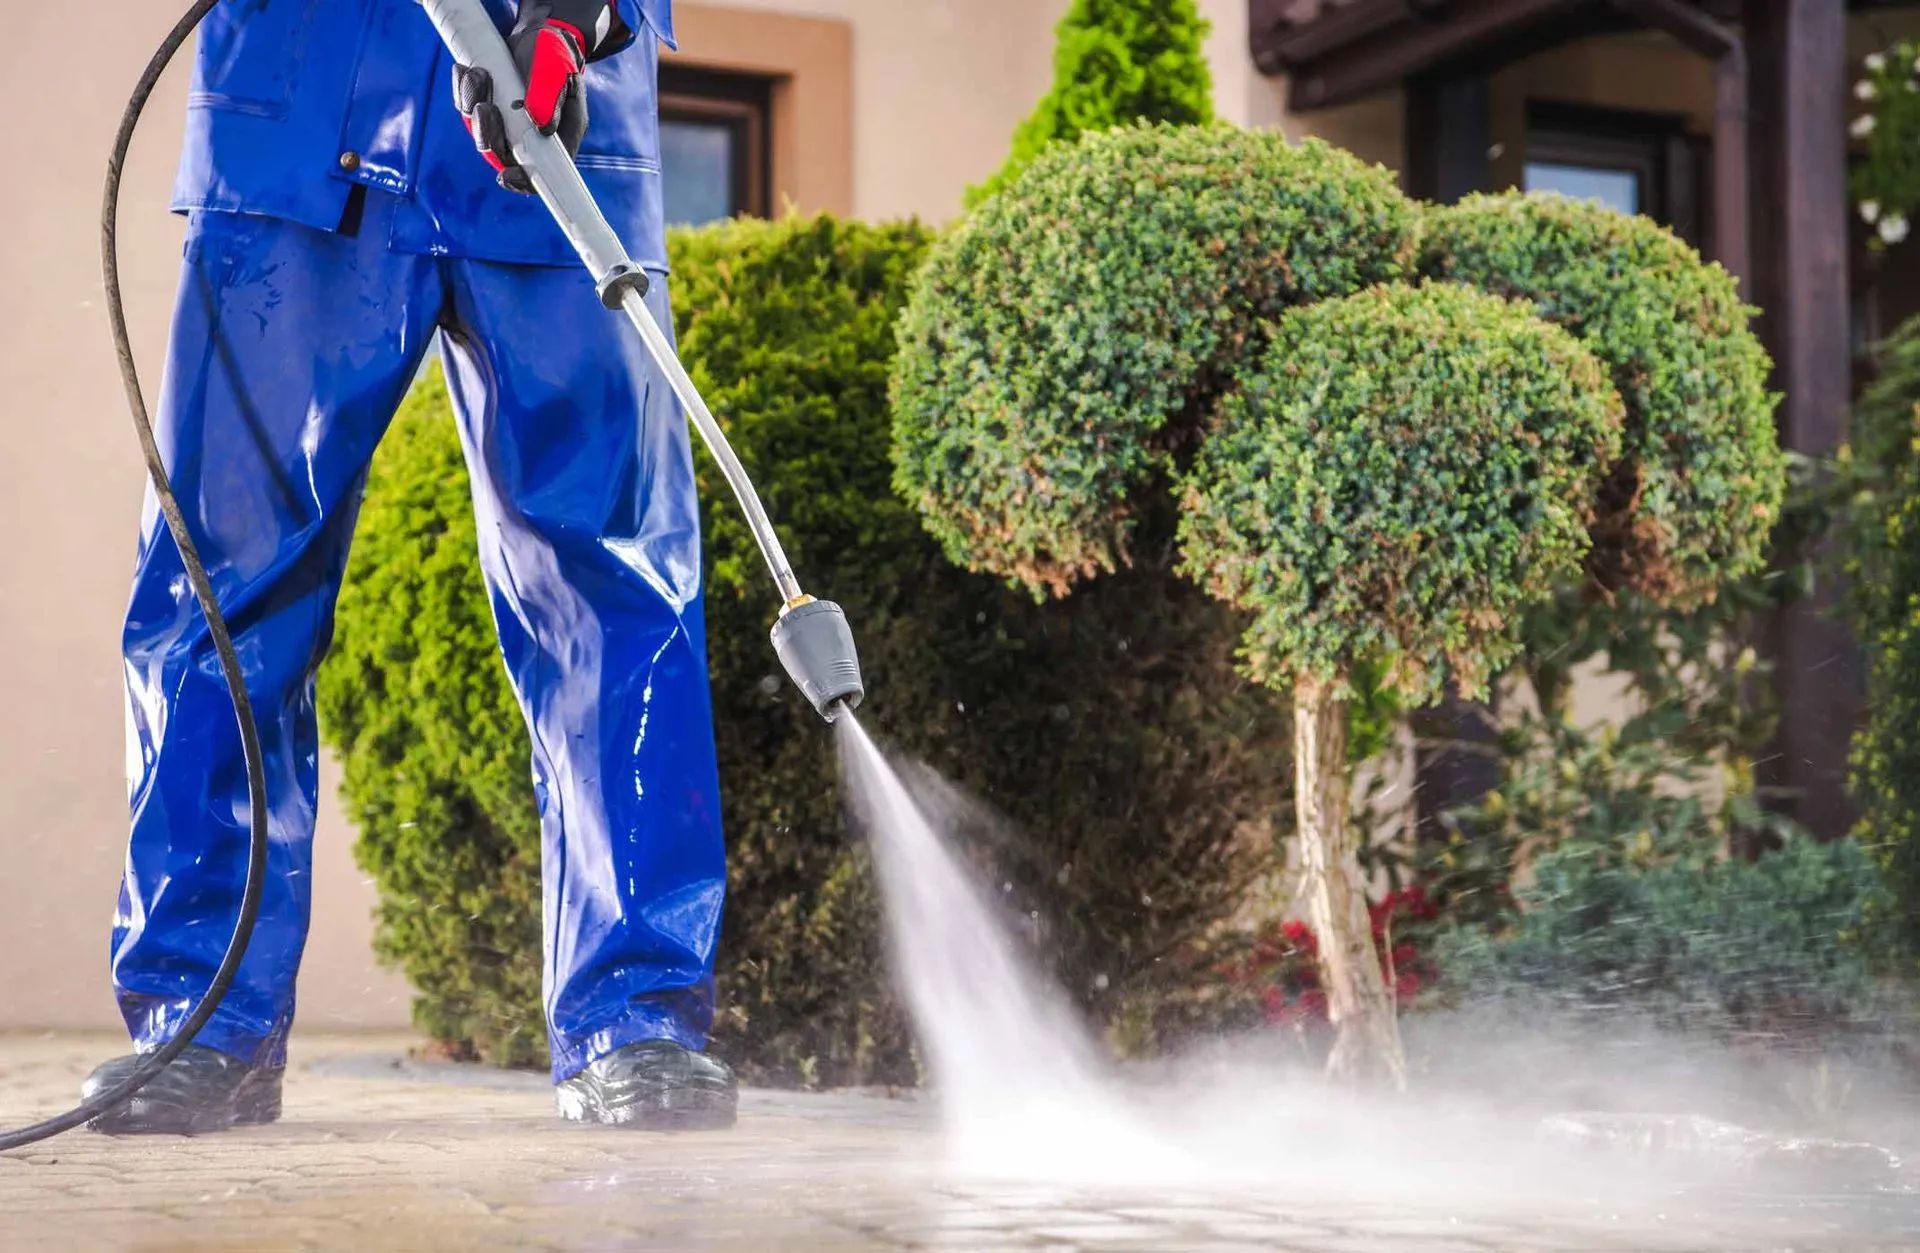 a man is using a high pressure washer to clean the sidewalk in front of a house